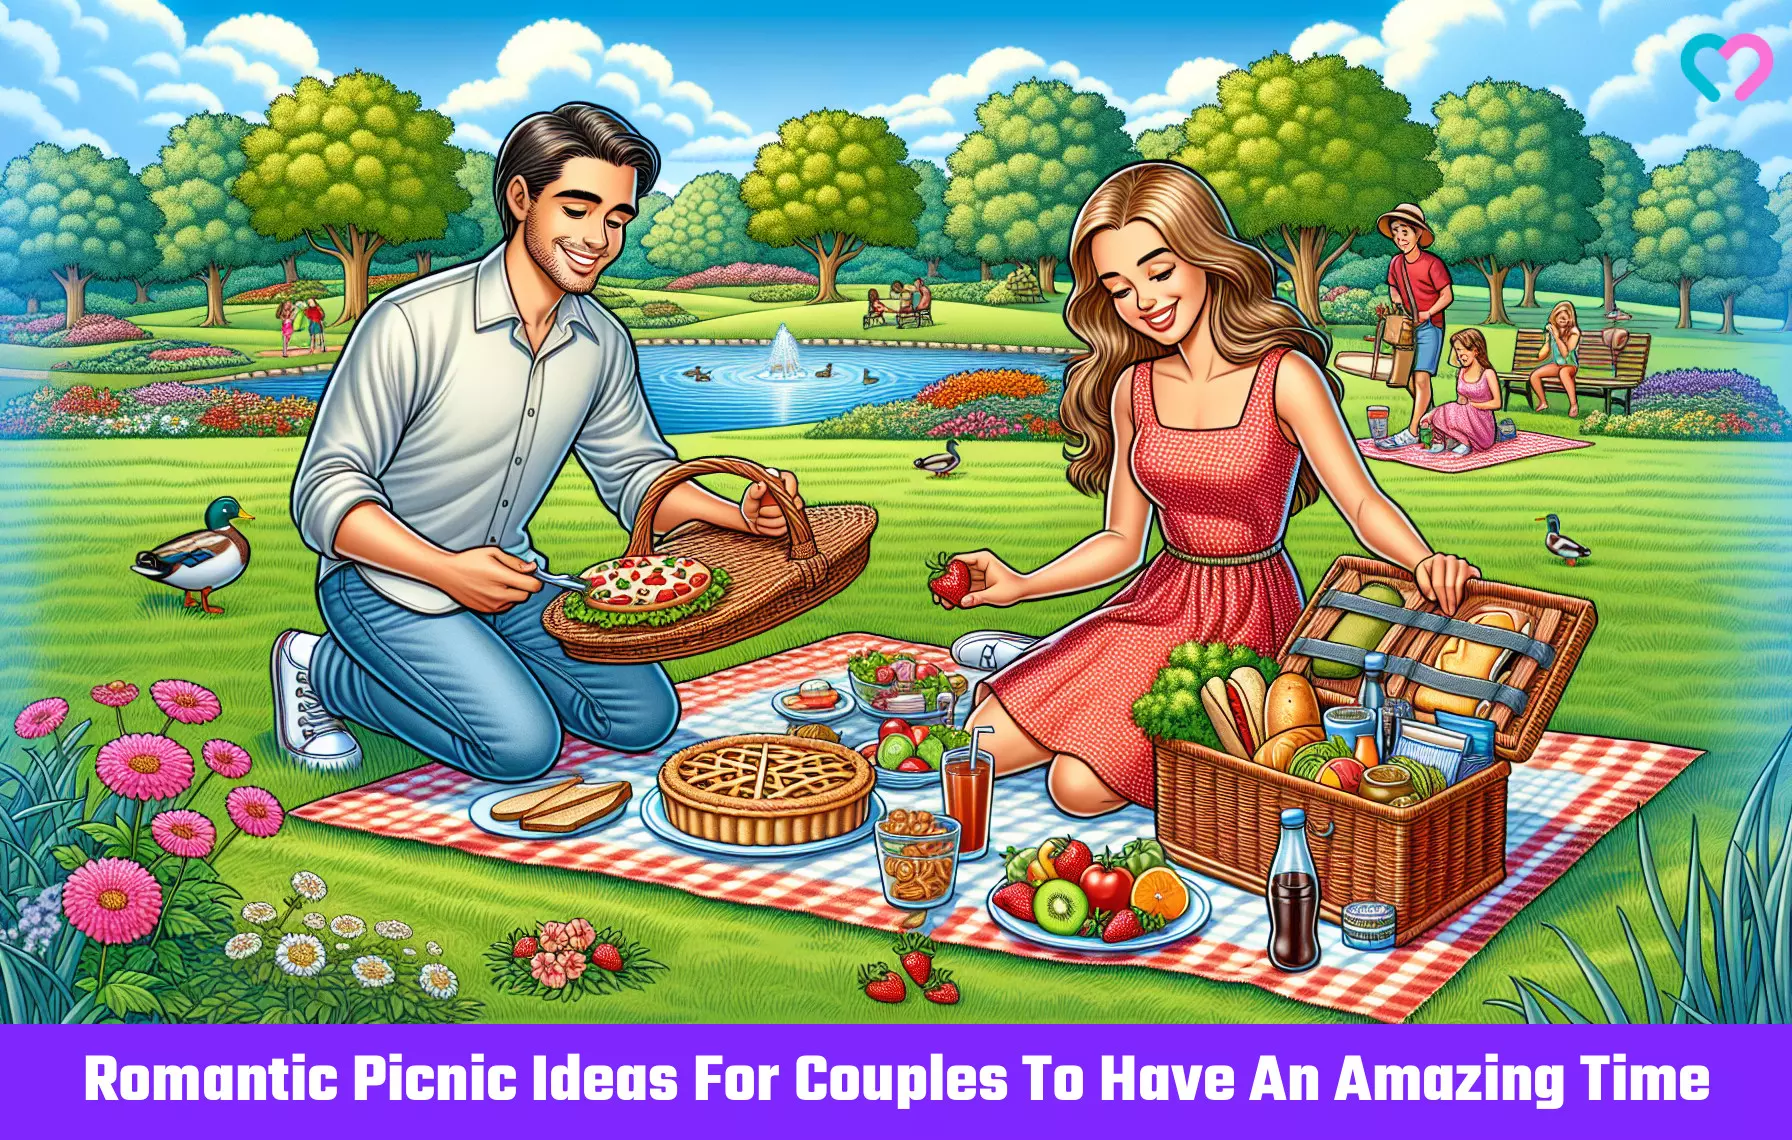 Picnic ideas for couples_illustration